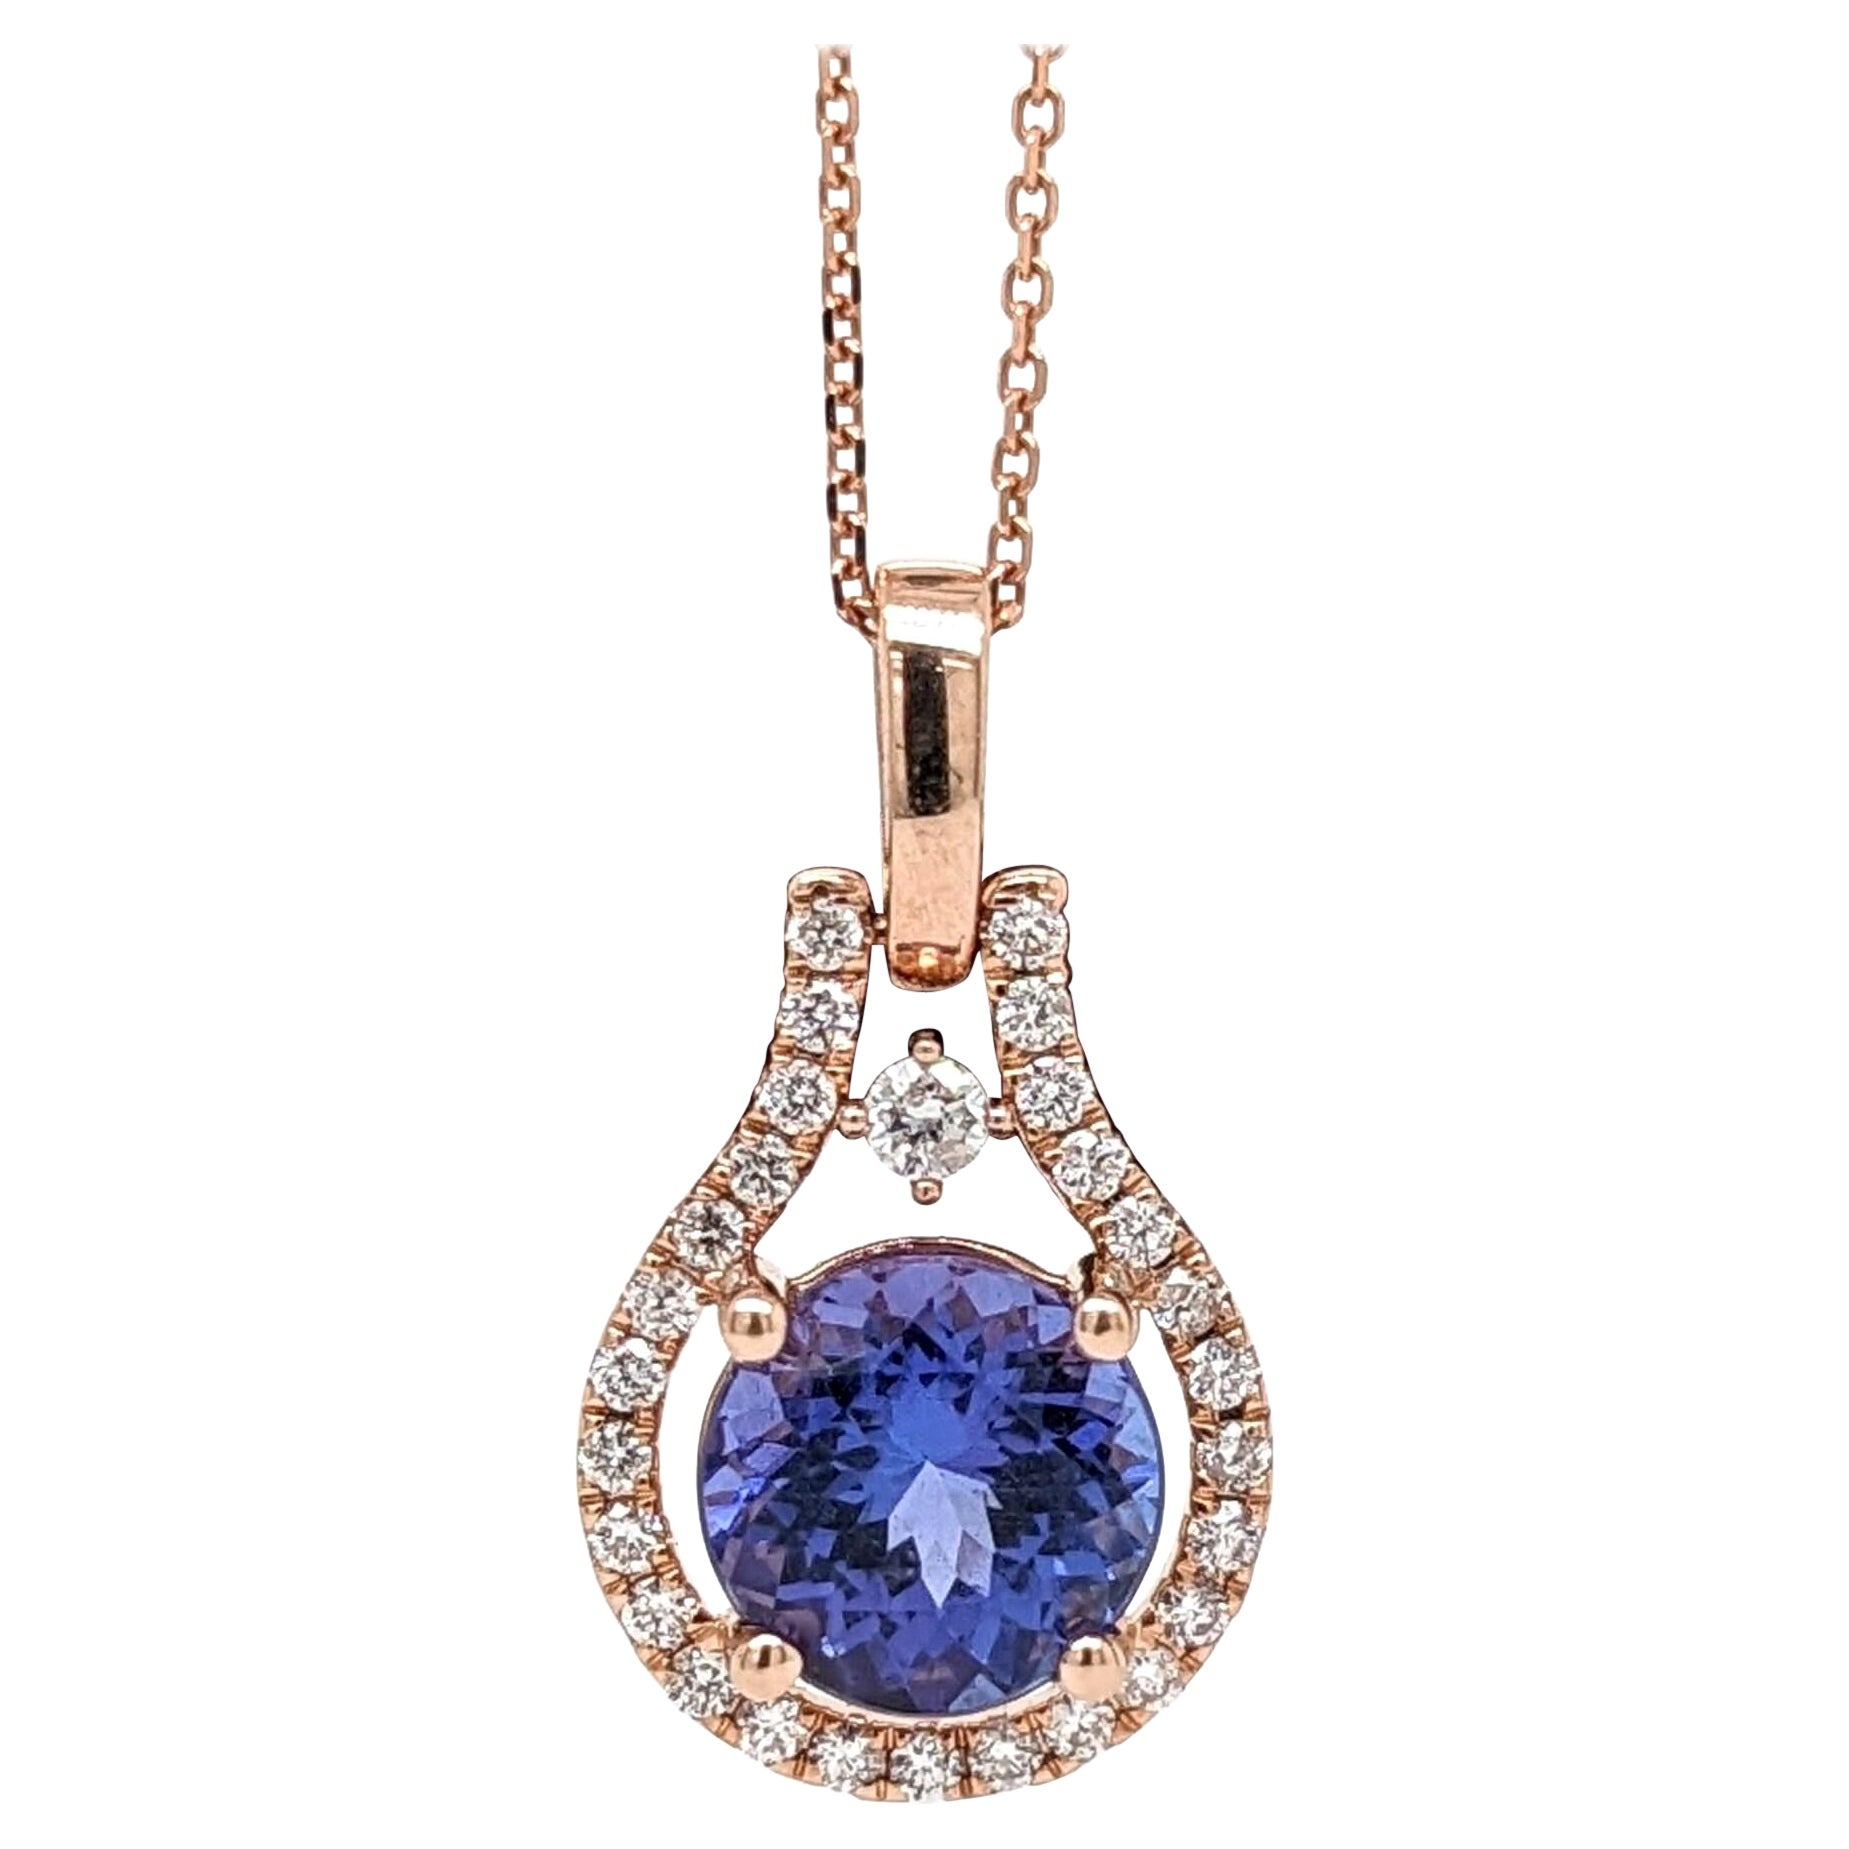 1.6ct Tanzanite Pendant w Earth Mined Diamonds in Solid 14K Rose Gold Round 8mm